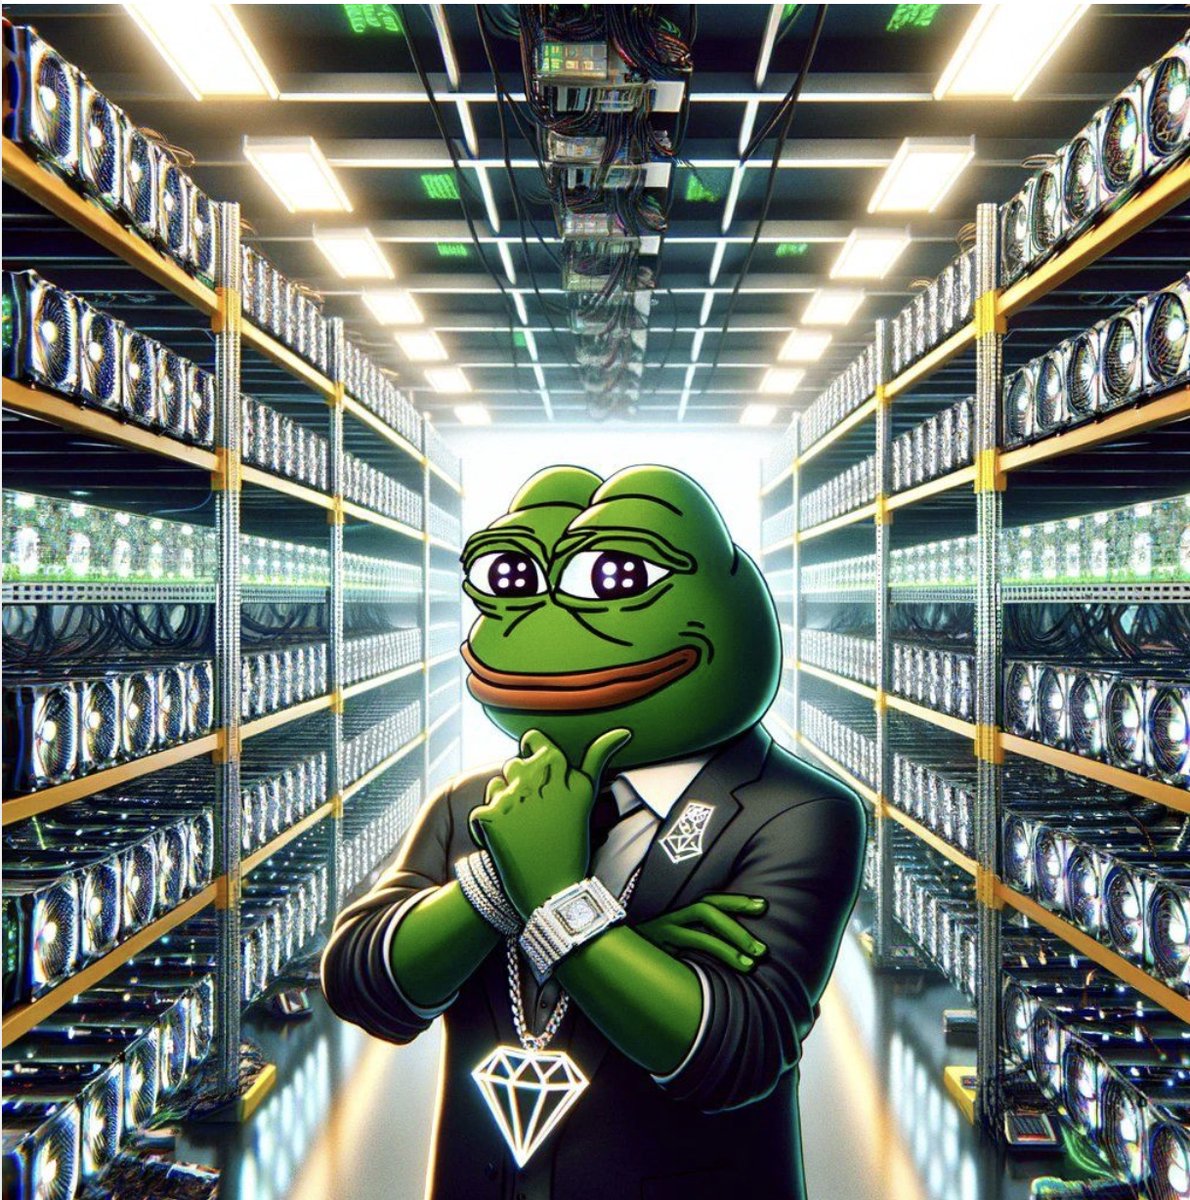 Dont miss the PepeCoin Train, its about to leave the station !!! @pepecoins 🪙🥂🤌
🐸💚🐸💚🐸💚🐸💚🐸💚🐸
Hurry up, grab your pepecoins and stake them to earn your @BasedAI Rewards !! 
Its literally raining money in the Pepecoin World, its INSANE

Ive never seen dips get eaten up…